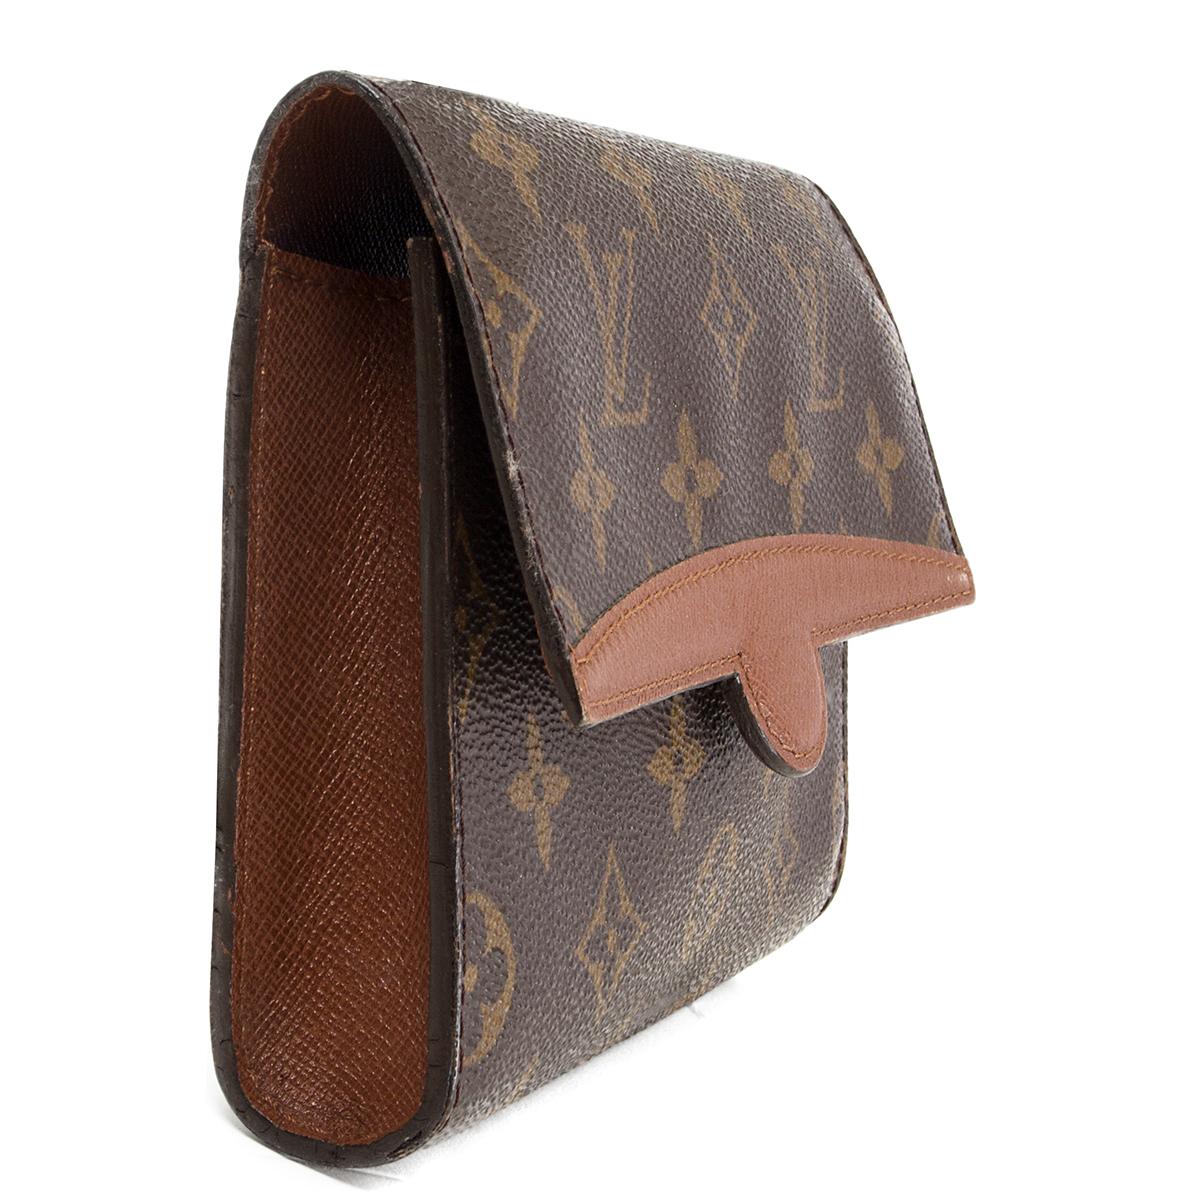 100% authentic Louis Vuitton 'Pochette Arche' fanny pack in brown and olive green monogram canvas. Opens with a push button under the flap. Belt is missing. Belt loops fit a 3cm/1.18inches belt. Has been used and is in excellent condition. 

Height